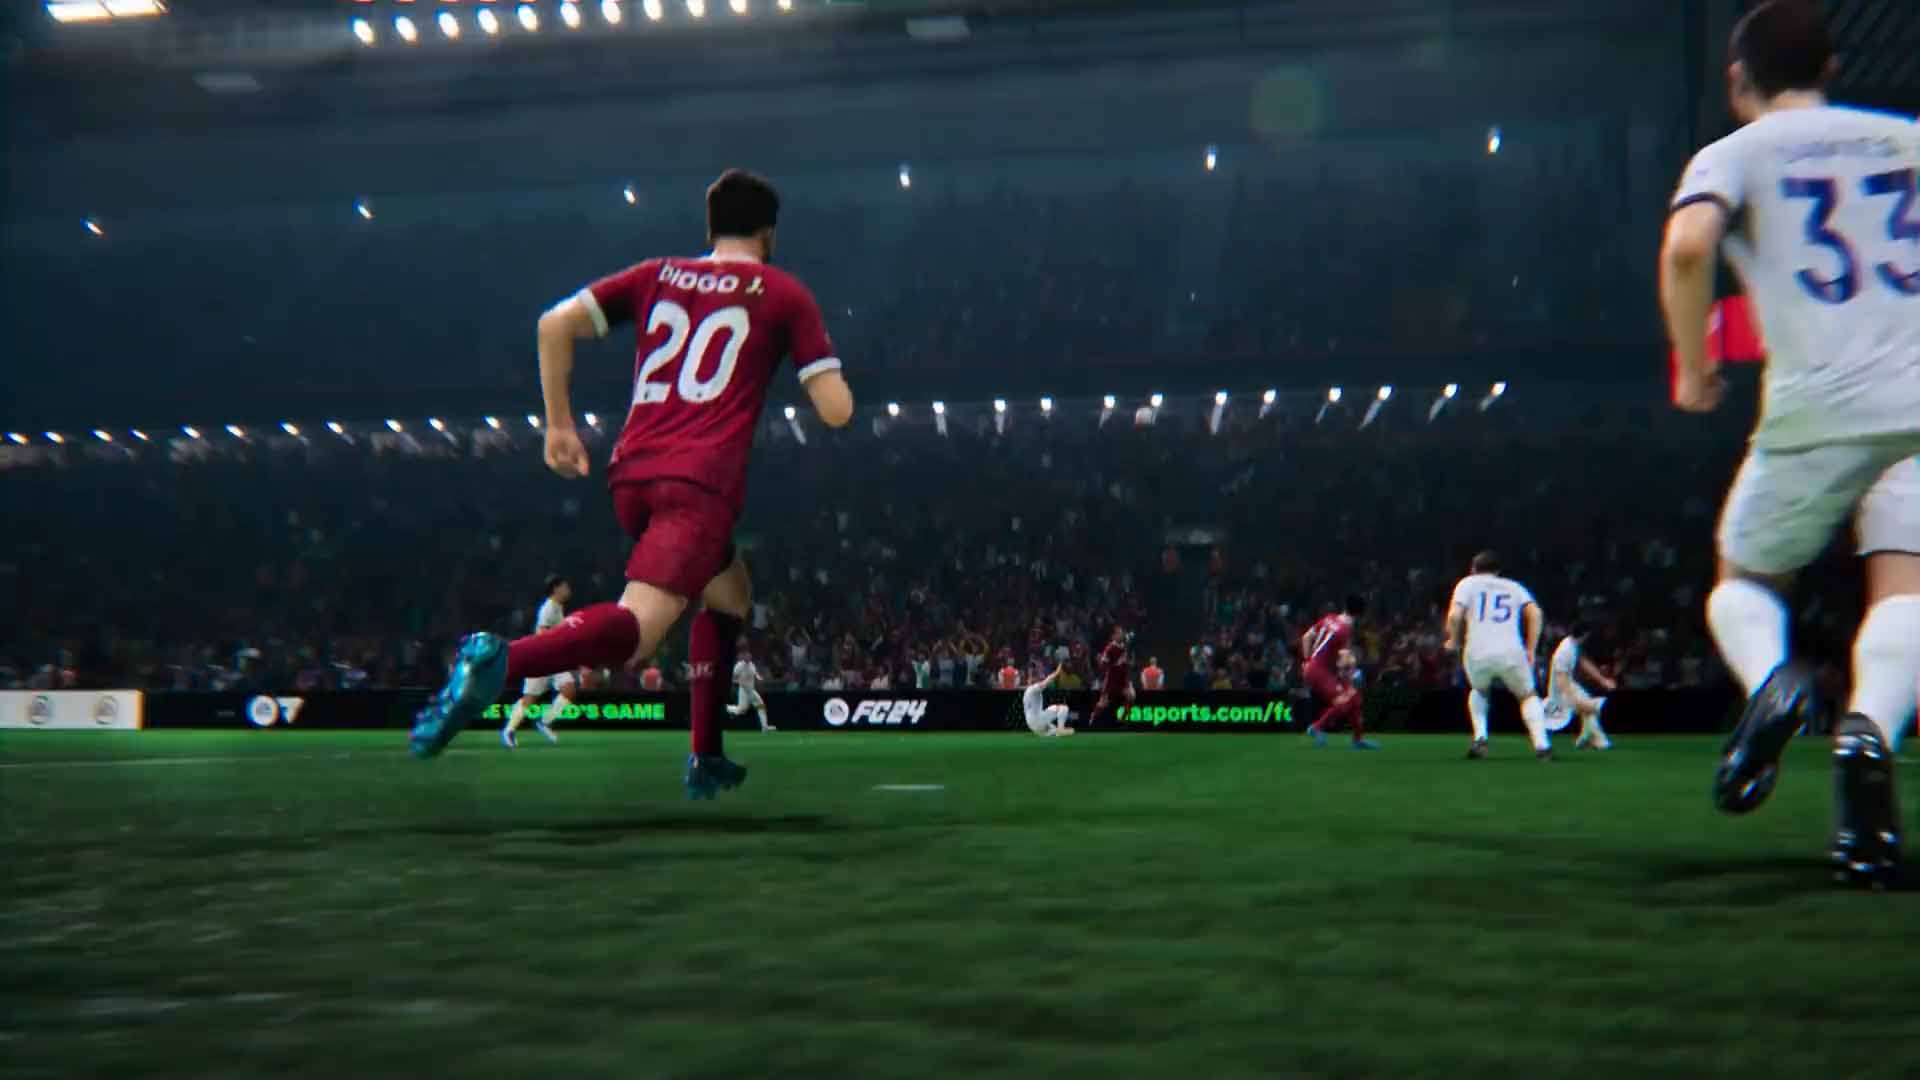 EA Play Pro - play from 29th? : r/EASportsFC